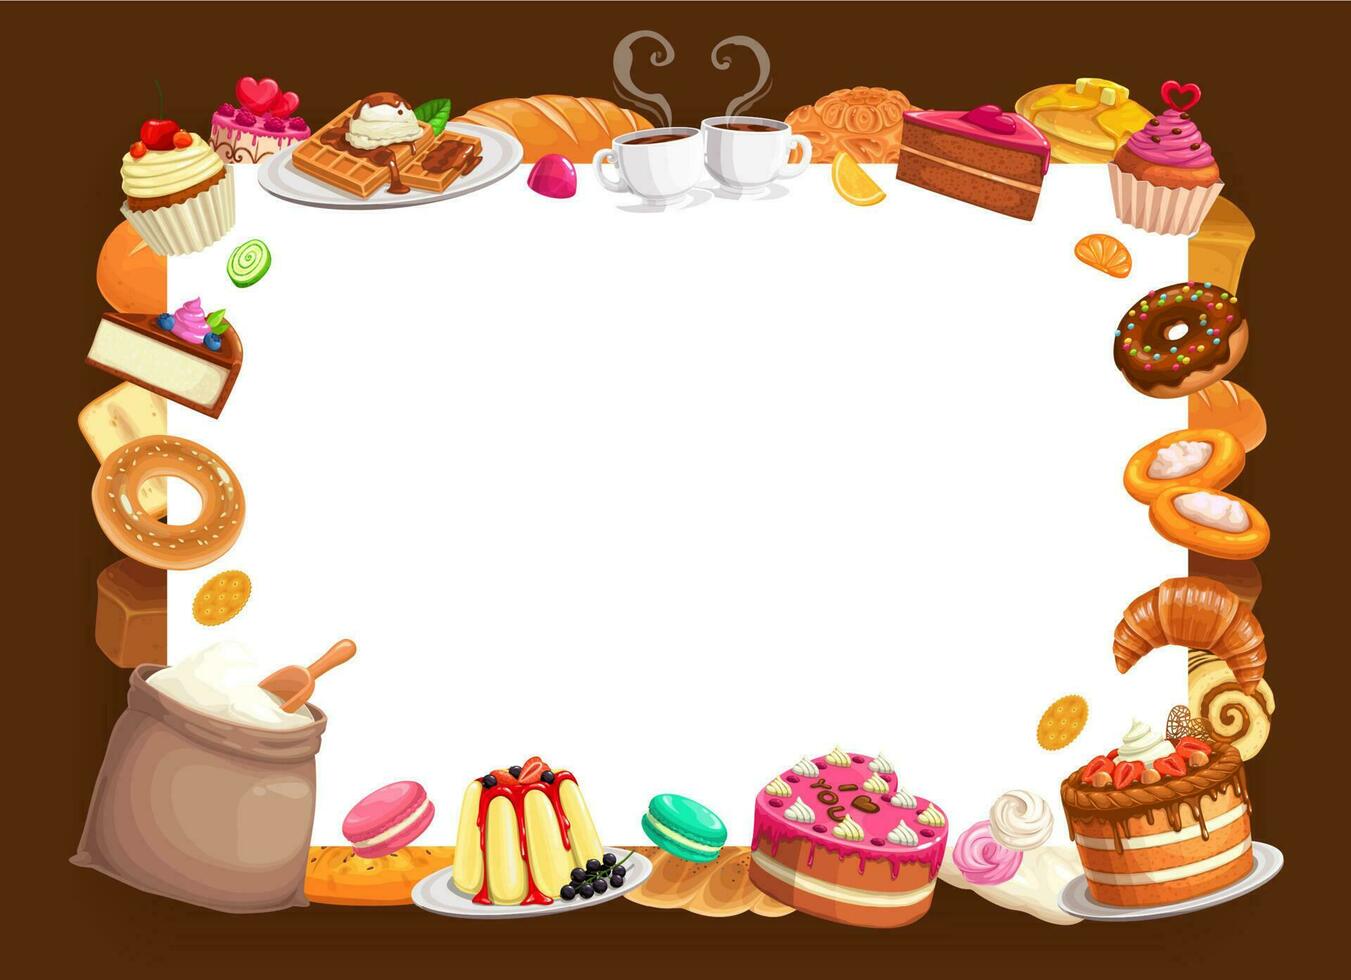 Baker shop vector bakery pastry and desserts frame